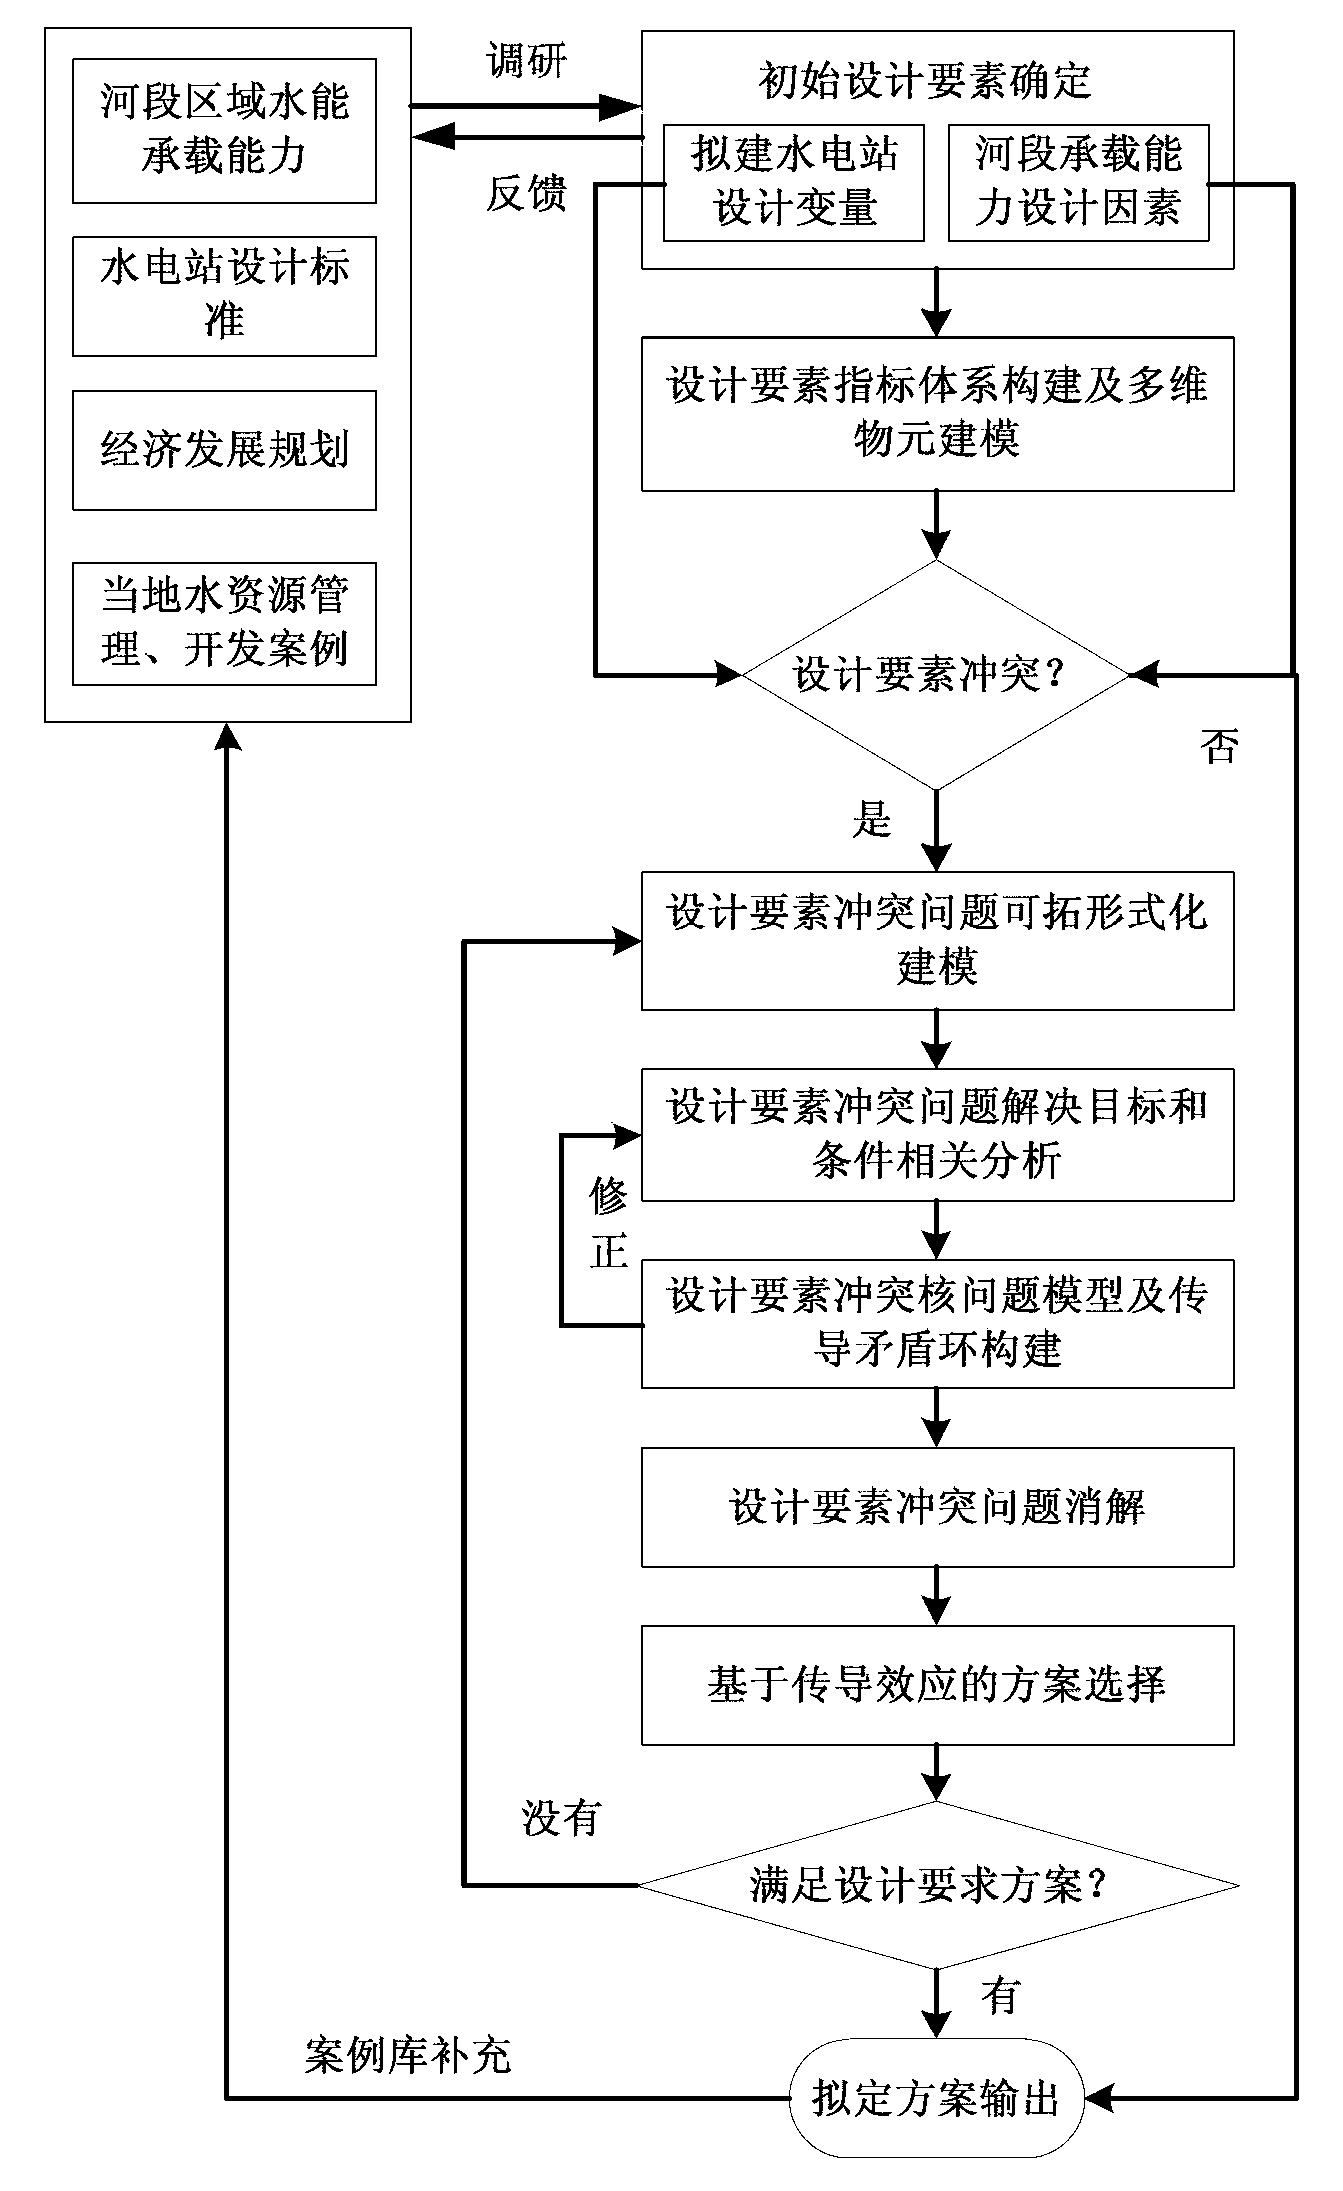 Regional water bearing capacity calculation method based on extension conduction effect